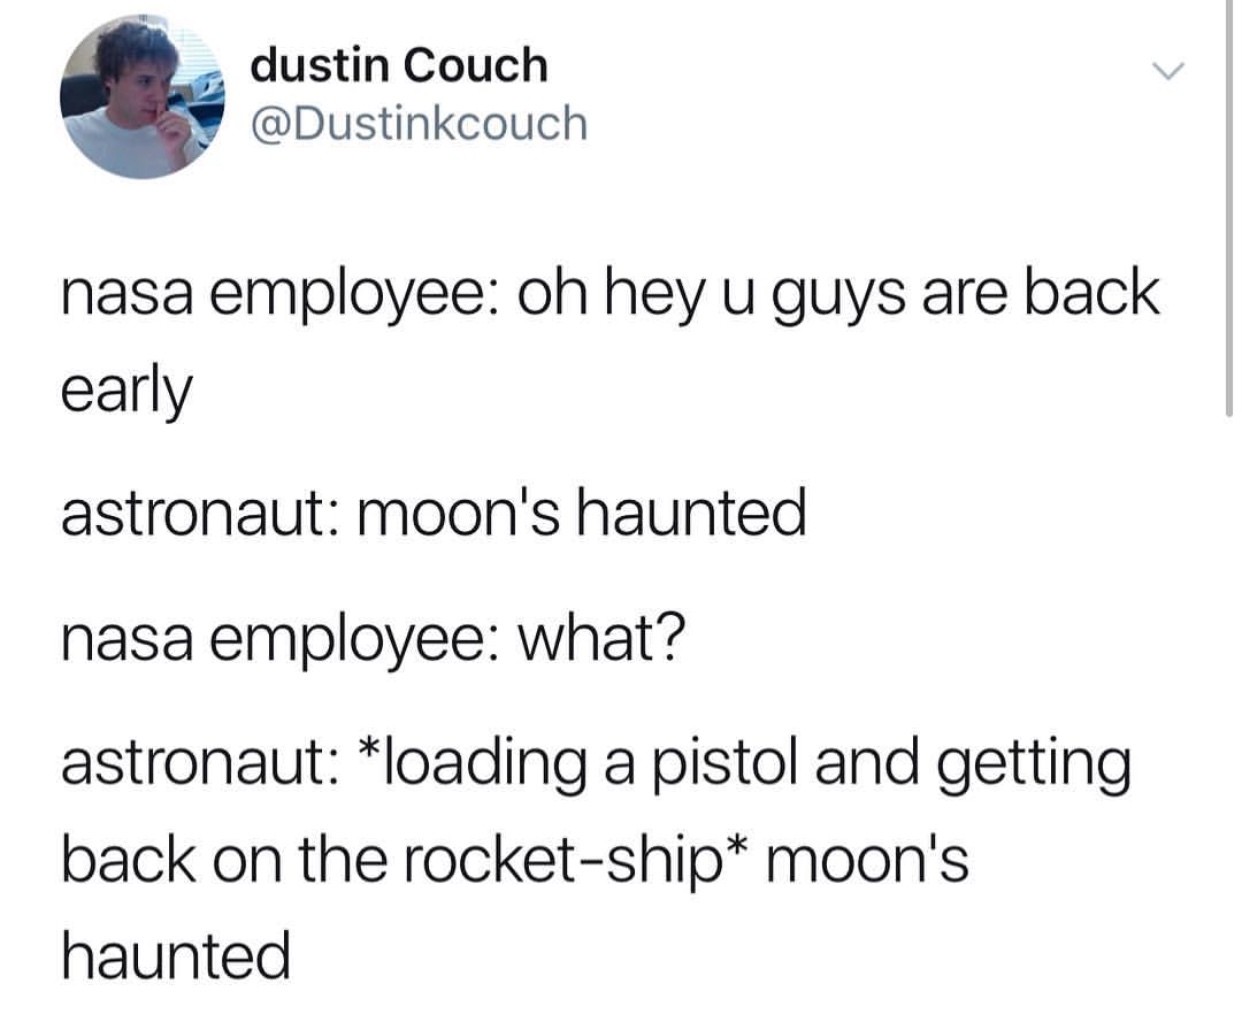 angle - dustin Couch nasa employee oh hey u guys are back early astronaut moon's haunted nasa employee what? astronaut loading a pistol and getting back on the rocketship moon's haunted